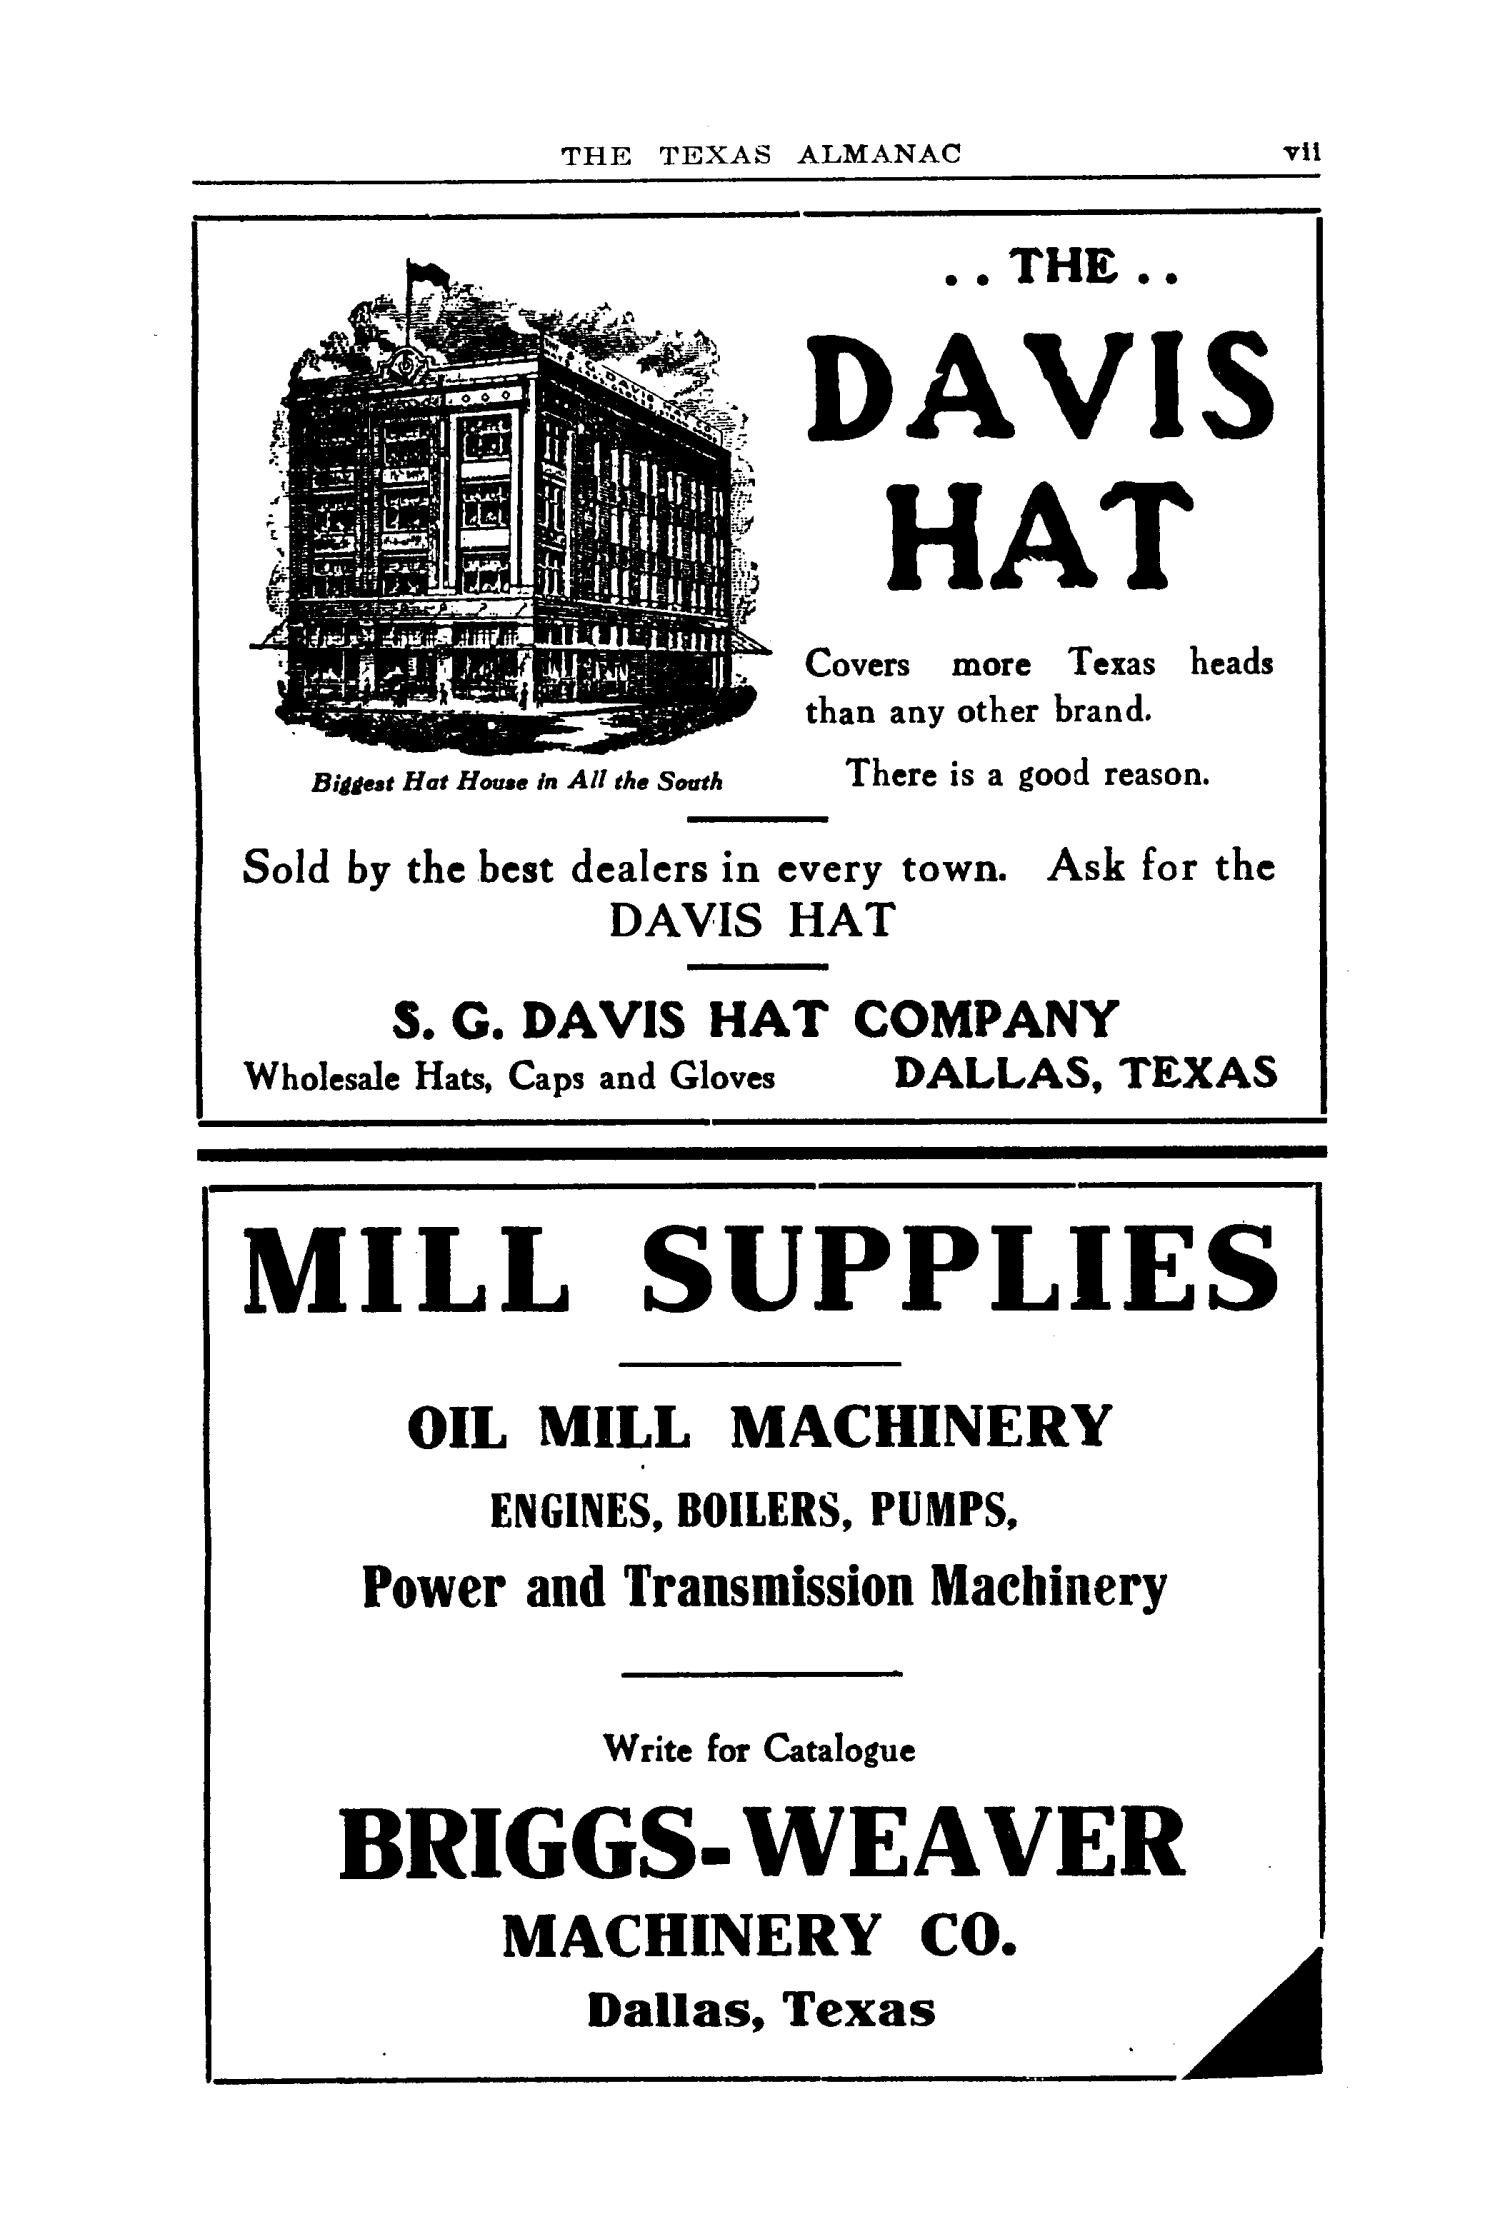 Texas Almanac and State Industrial Guide 1912
                                                
                                                    VII
                                                